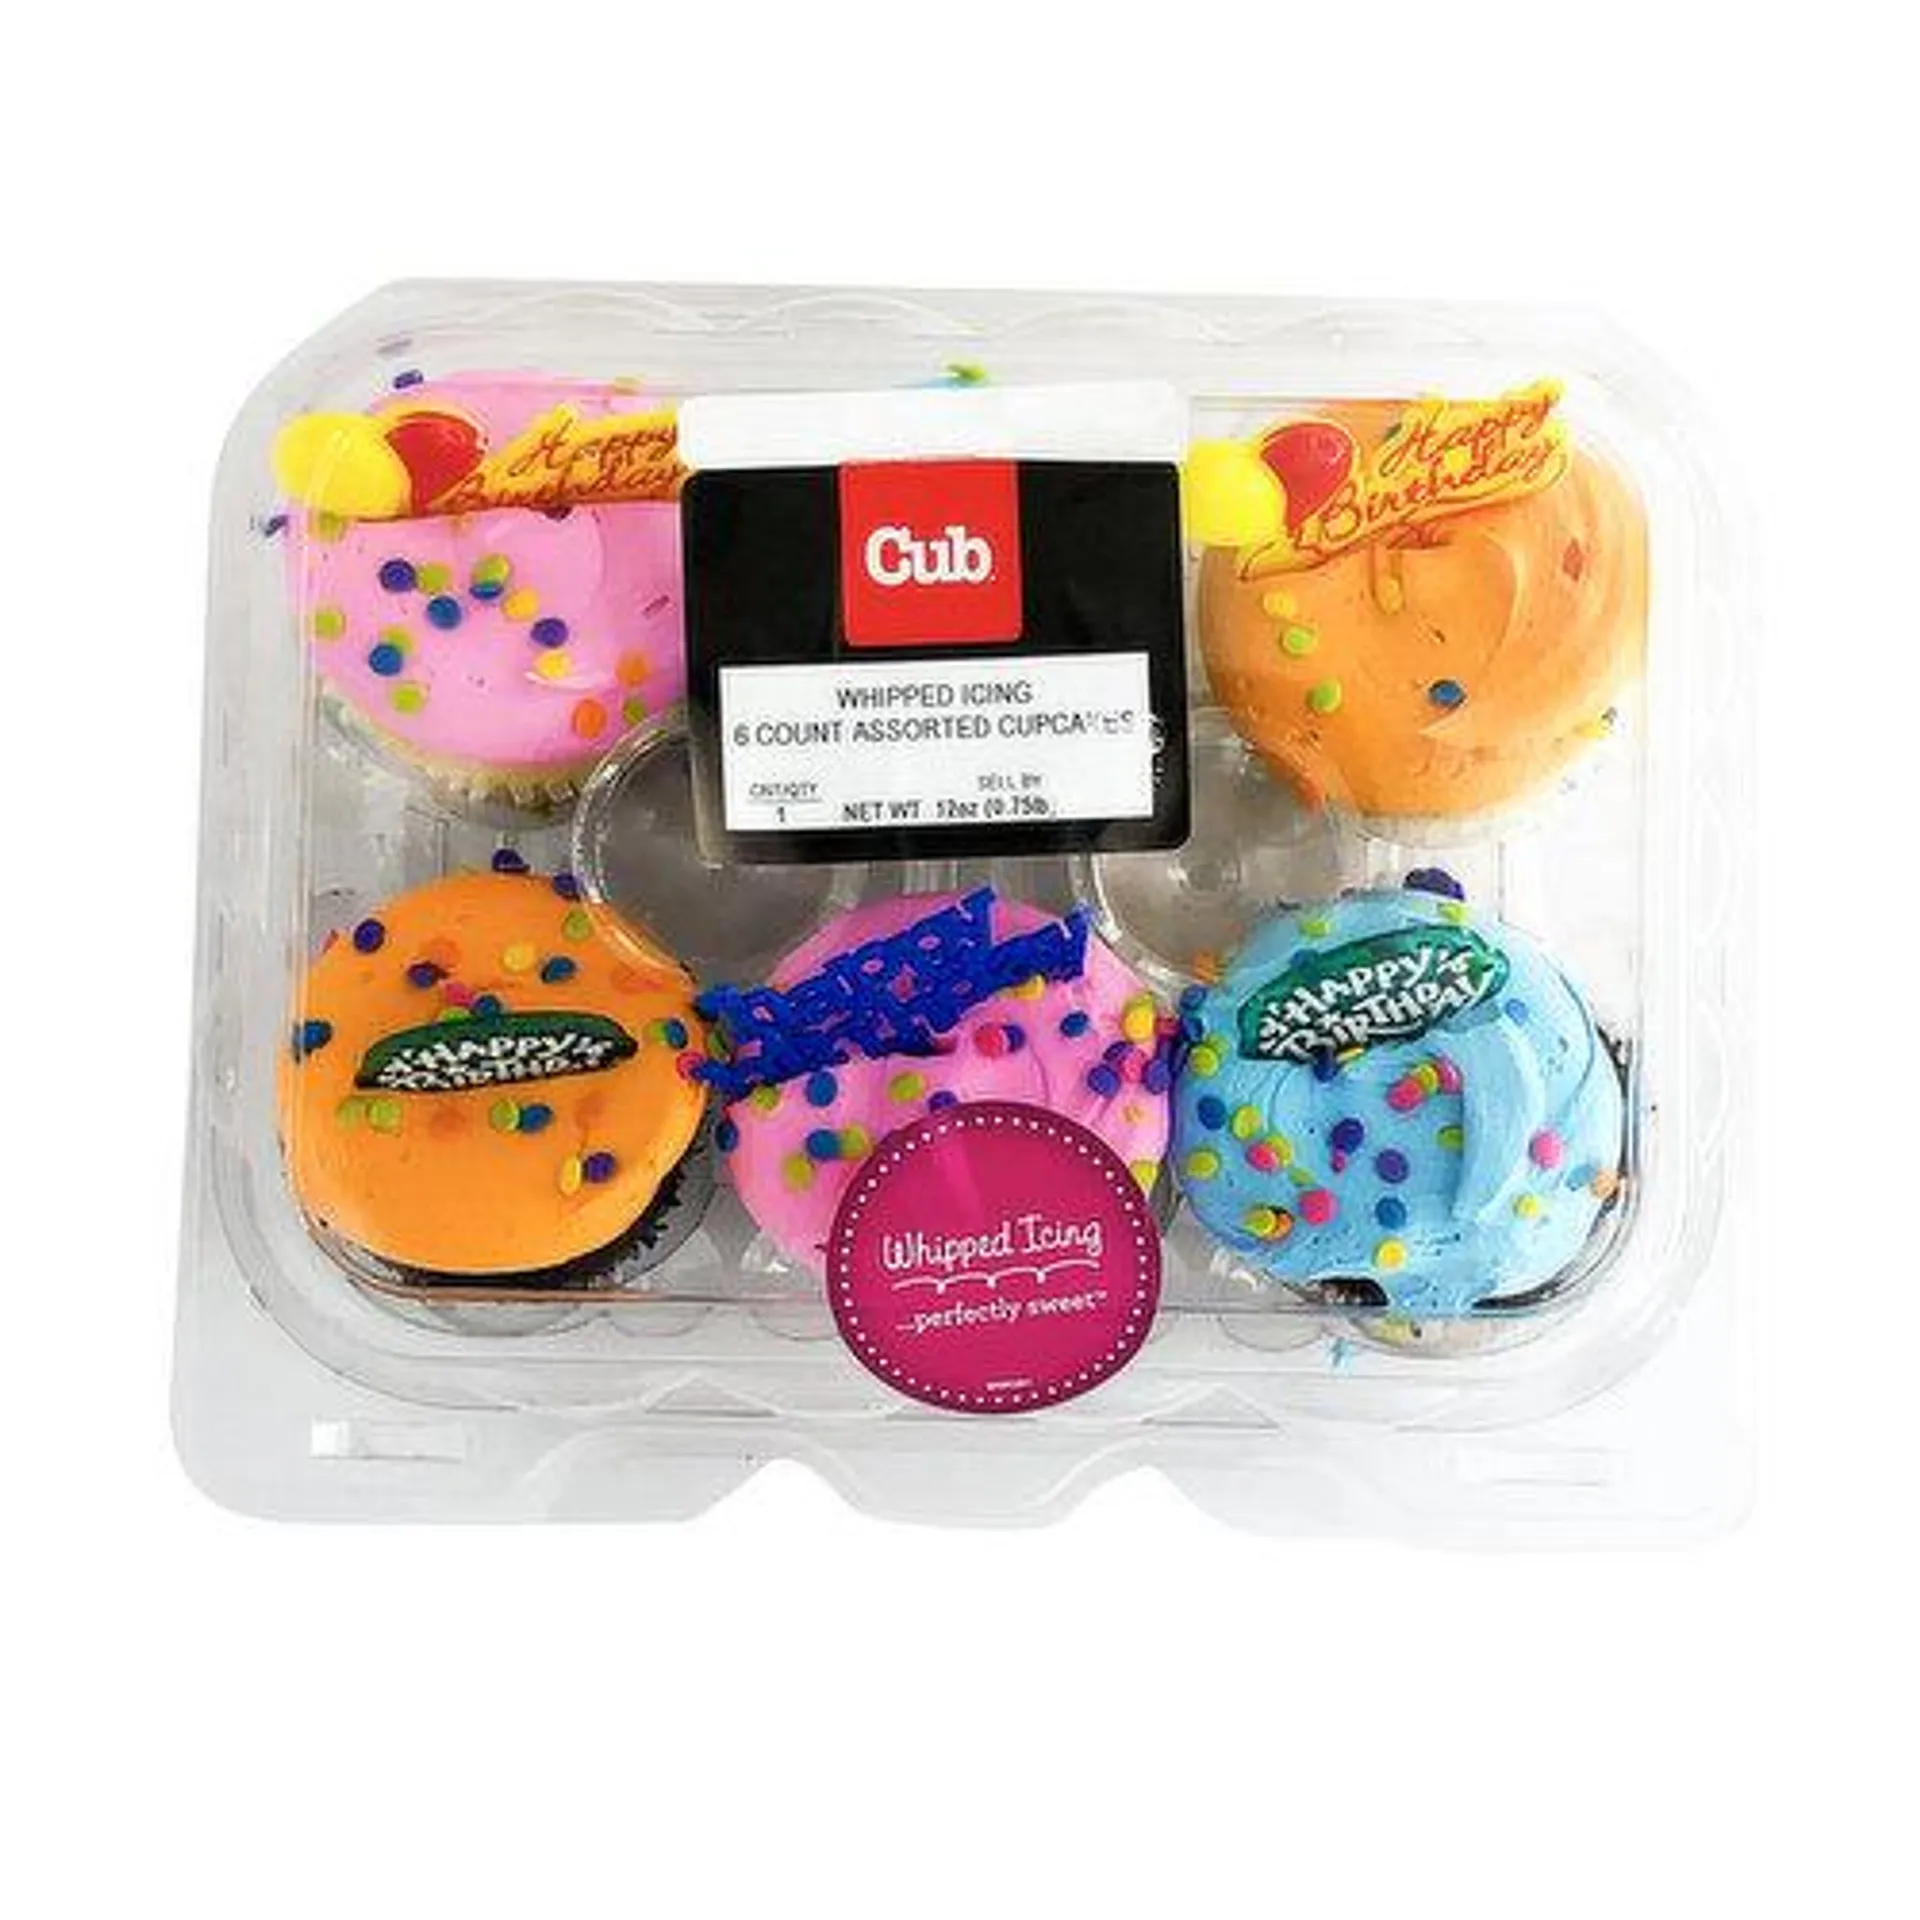 Cub Bakery Assorted Cupcakes with Whipped Icing 6 Count, 1 Each